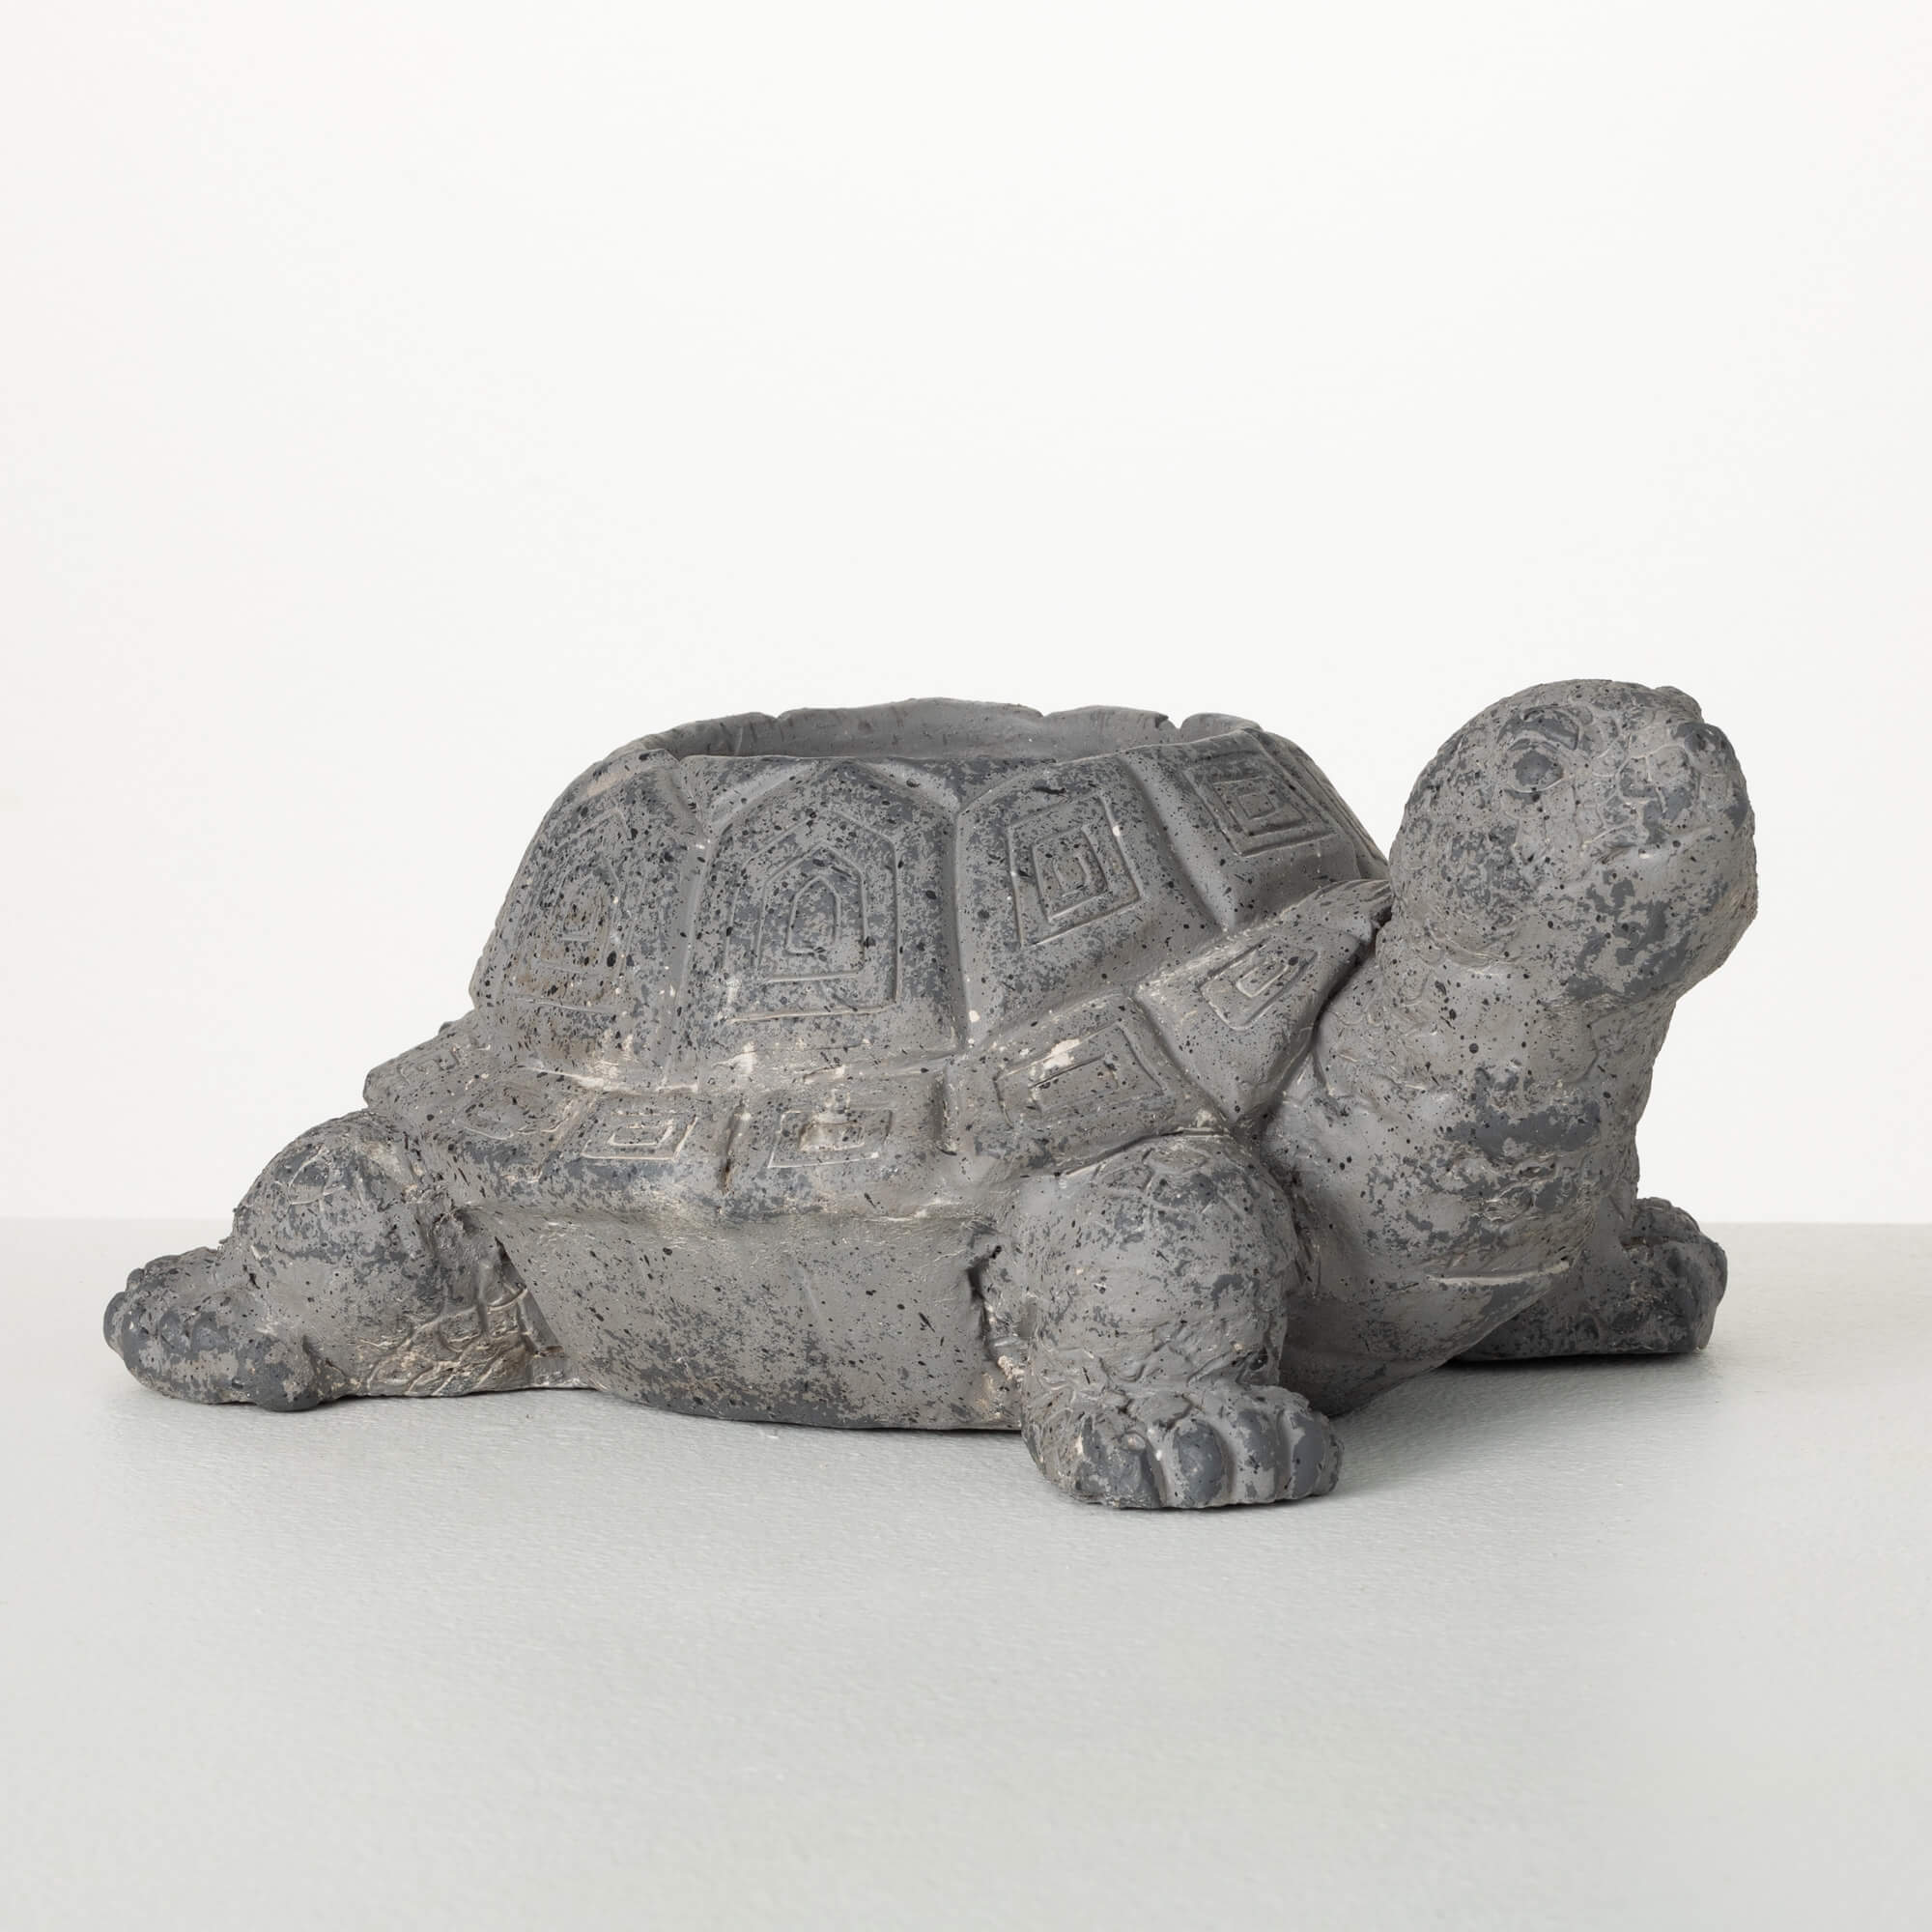 Charcoal Tortoise Planter Elevate Home Decor - Outdoors